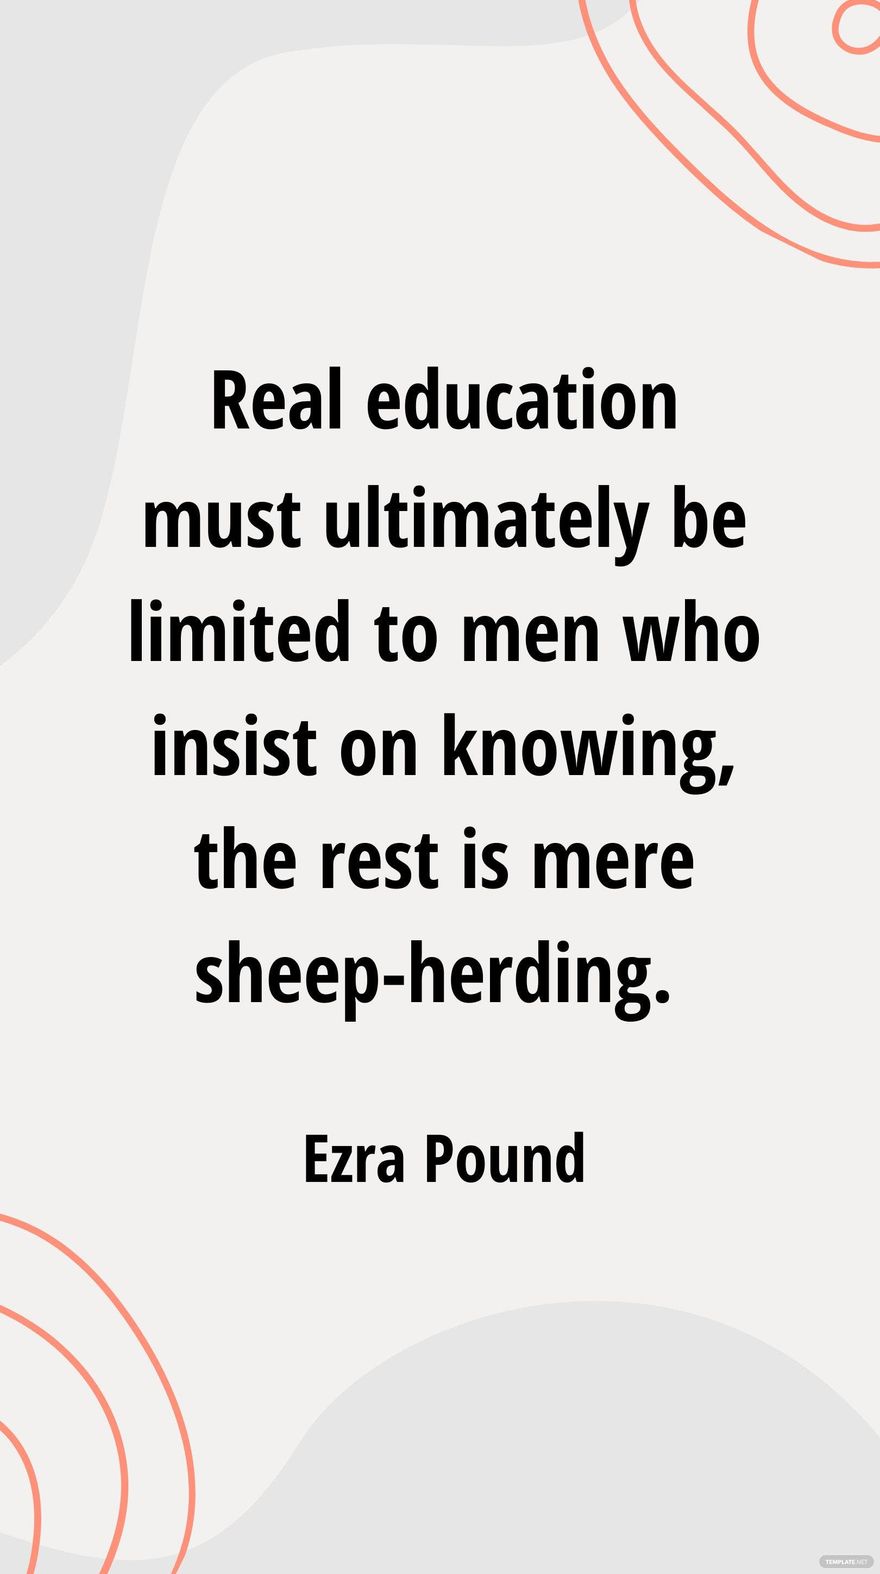 Ezra Pound - Real education must ultimately be limited to men who insist on knowing, the rest is mere sheep-herding.